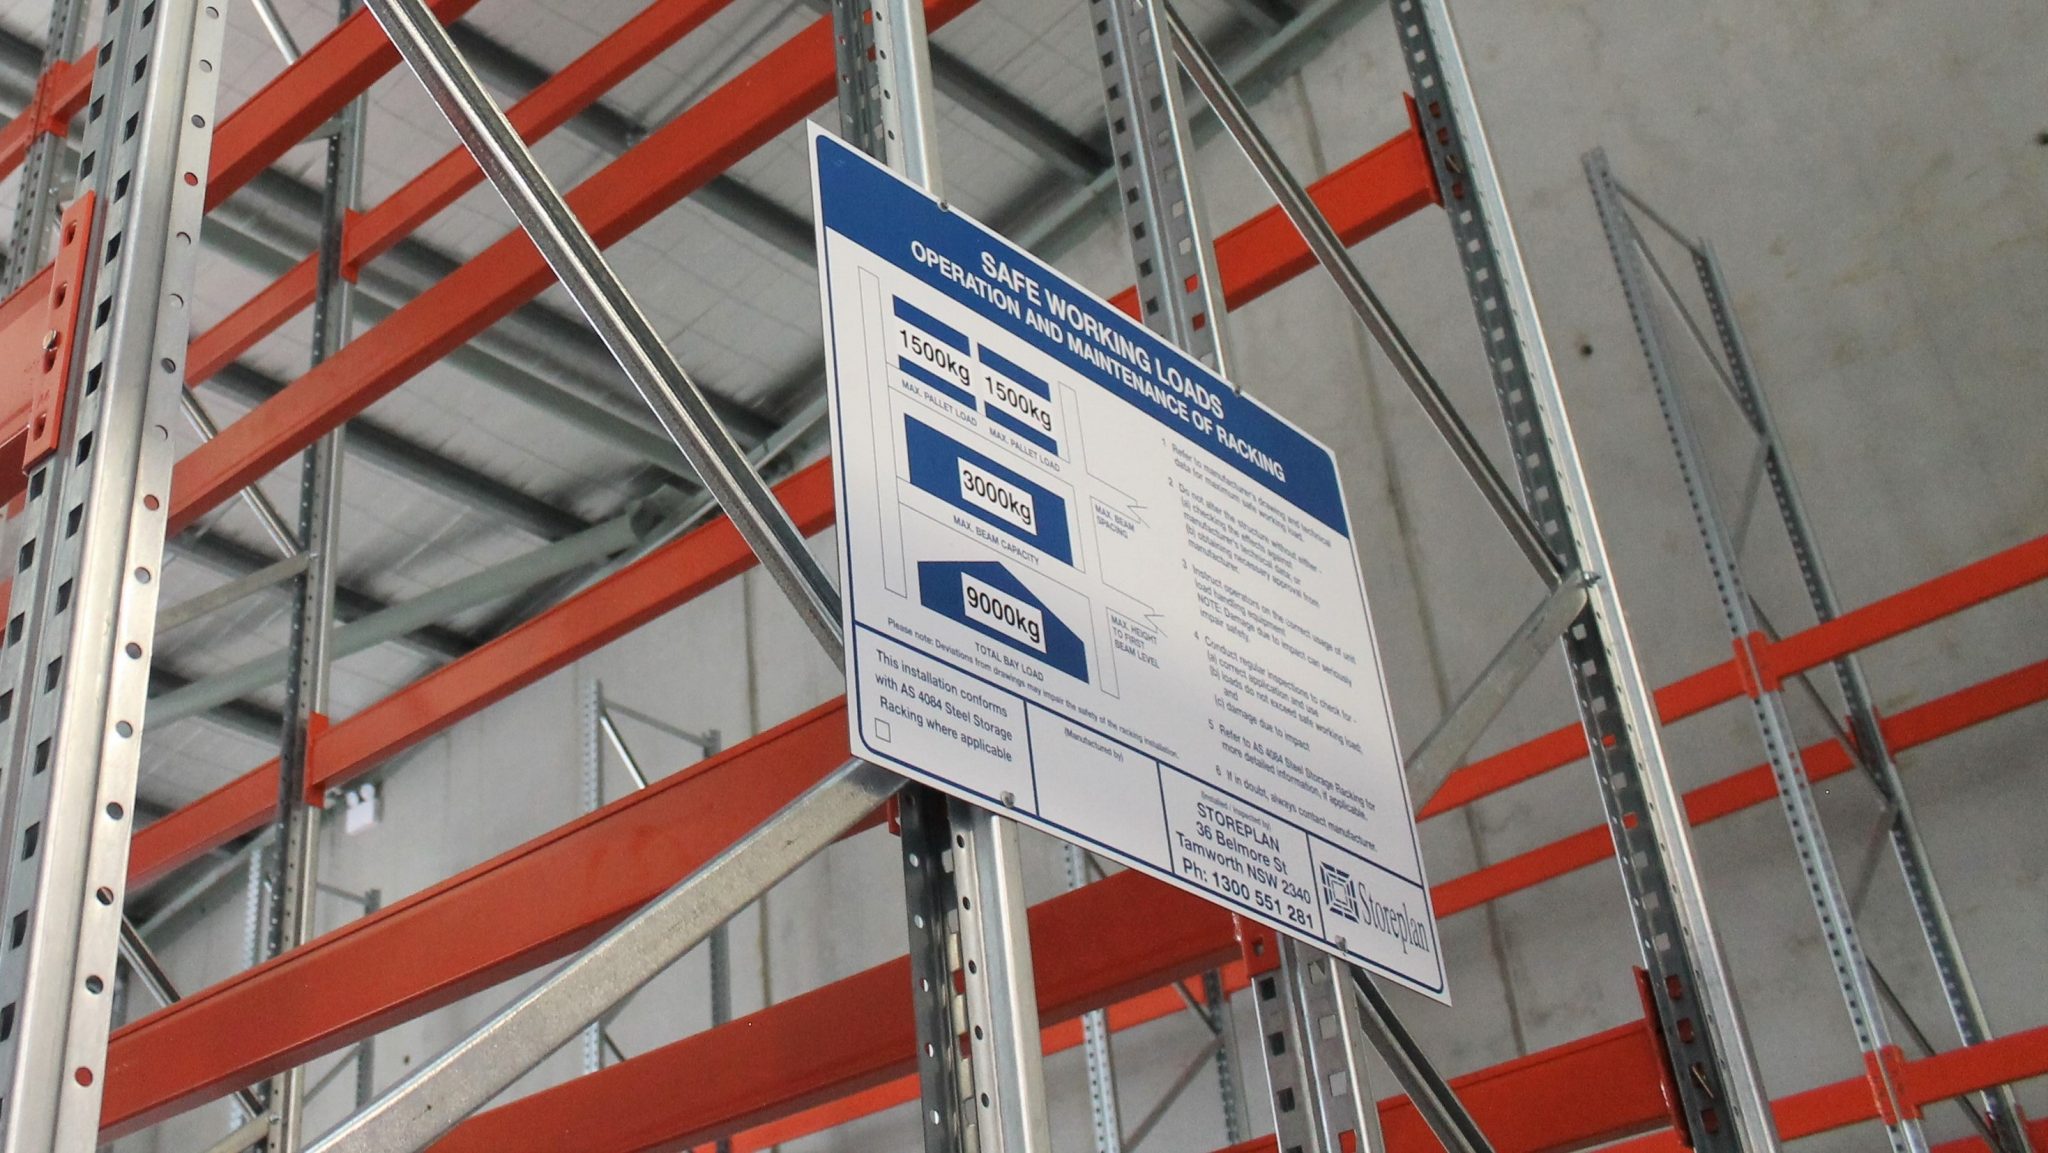 Safe Working Load (SWL) rating signs